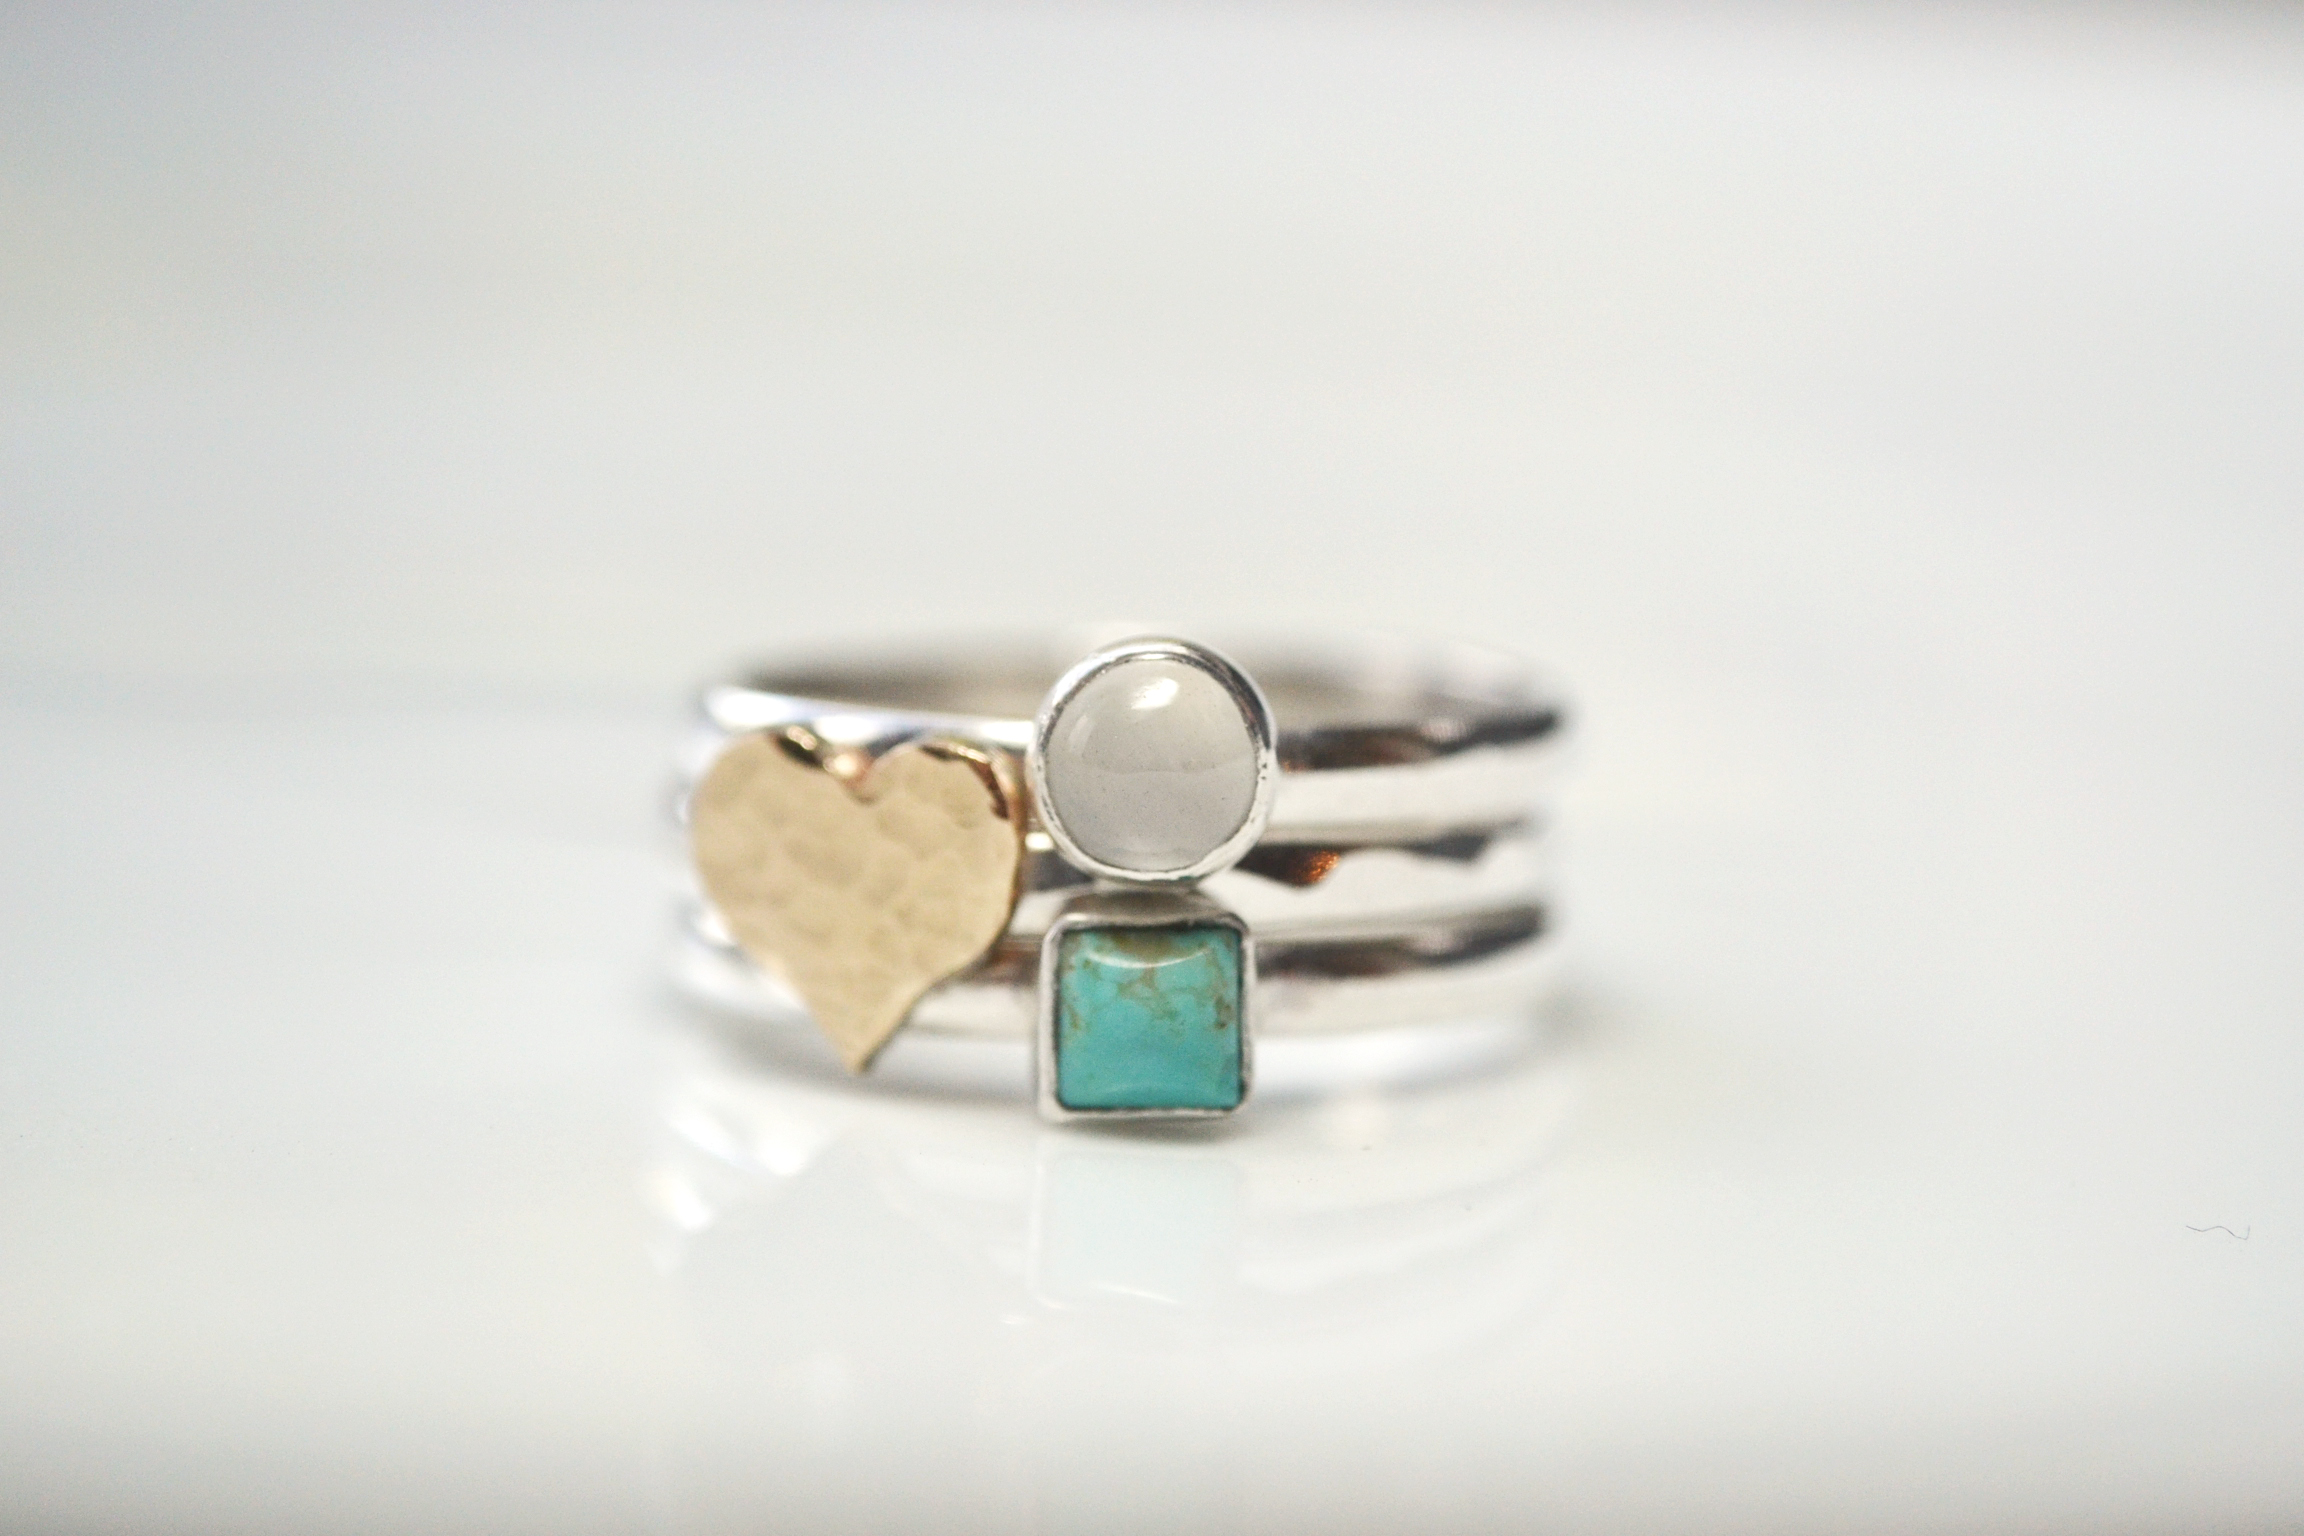 Gold heart with a 5mm moonstone and a 4mm turquoise square.